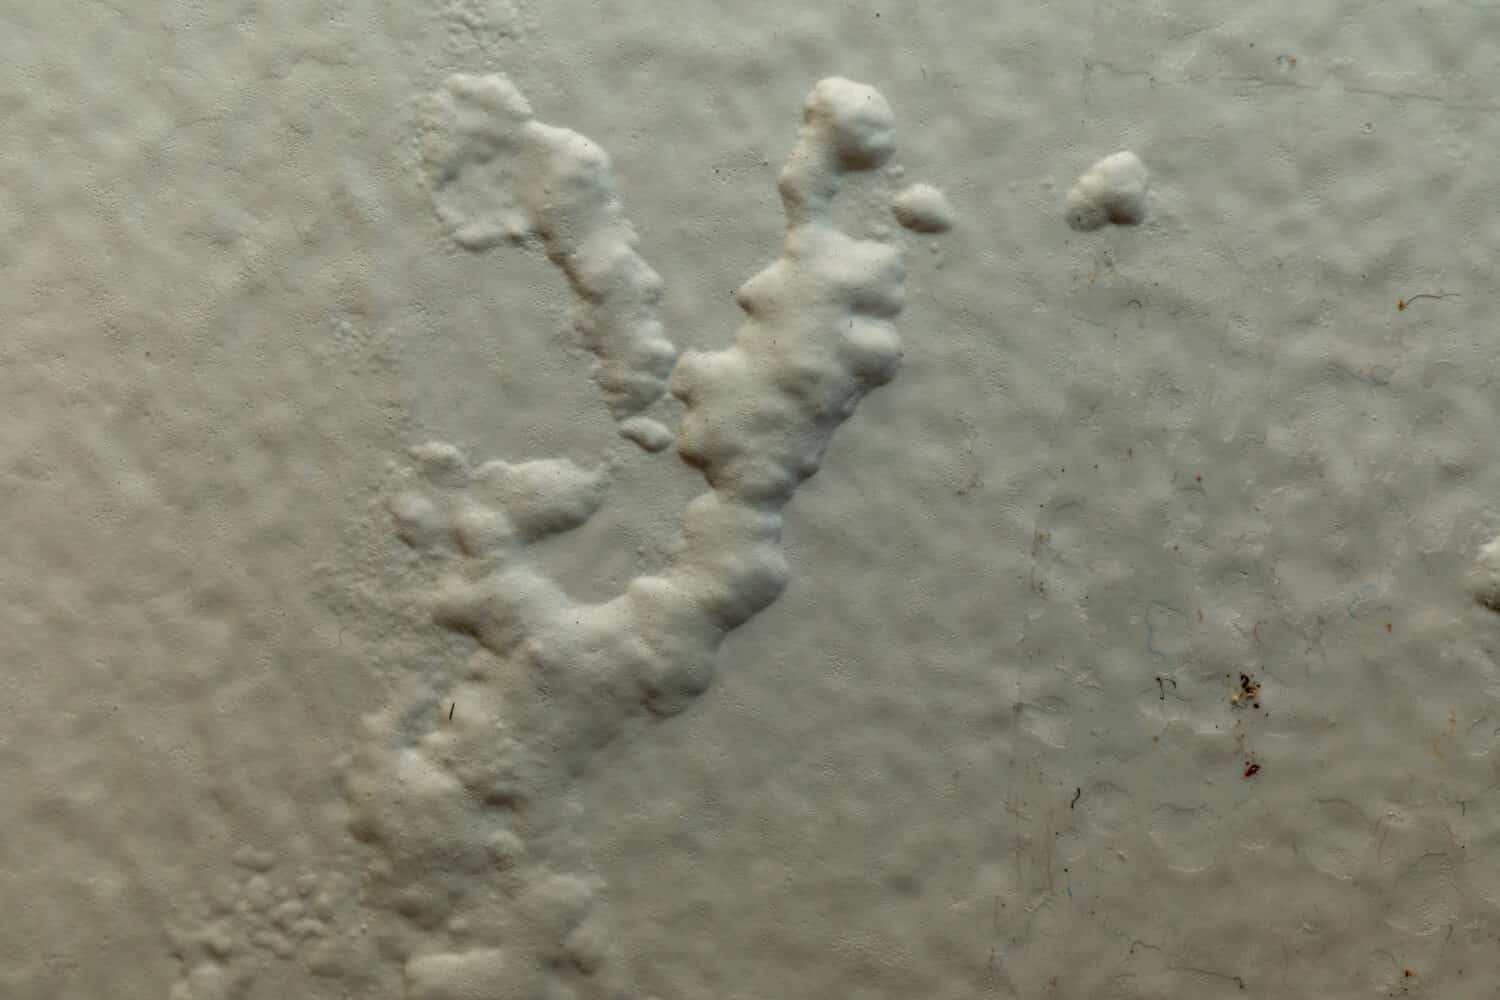 Close up air bubbles in paint on a concrete wall cause by moisture, damp surface.